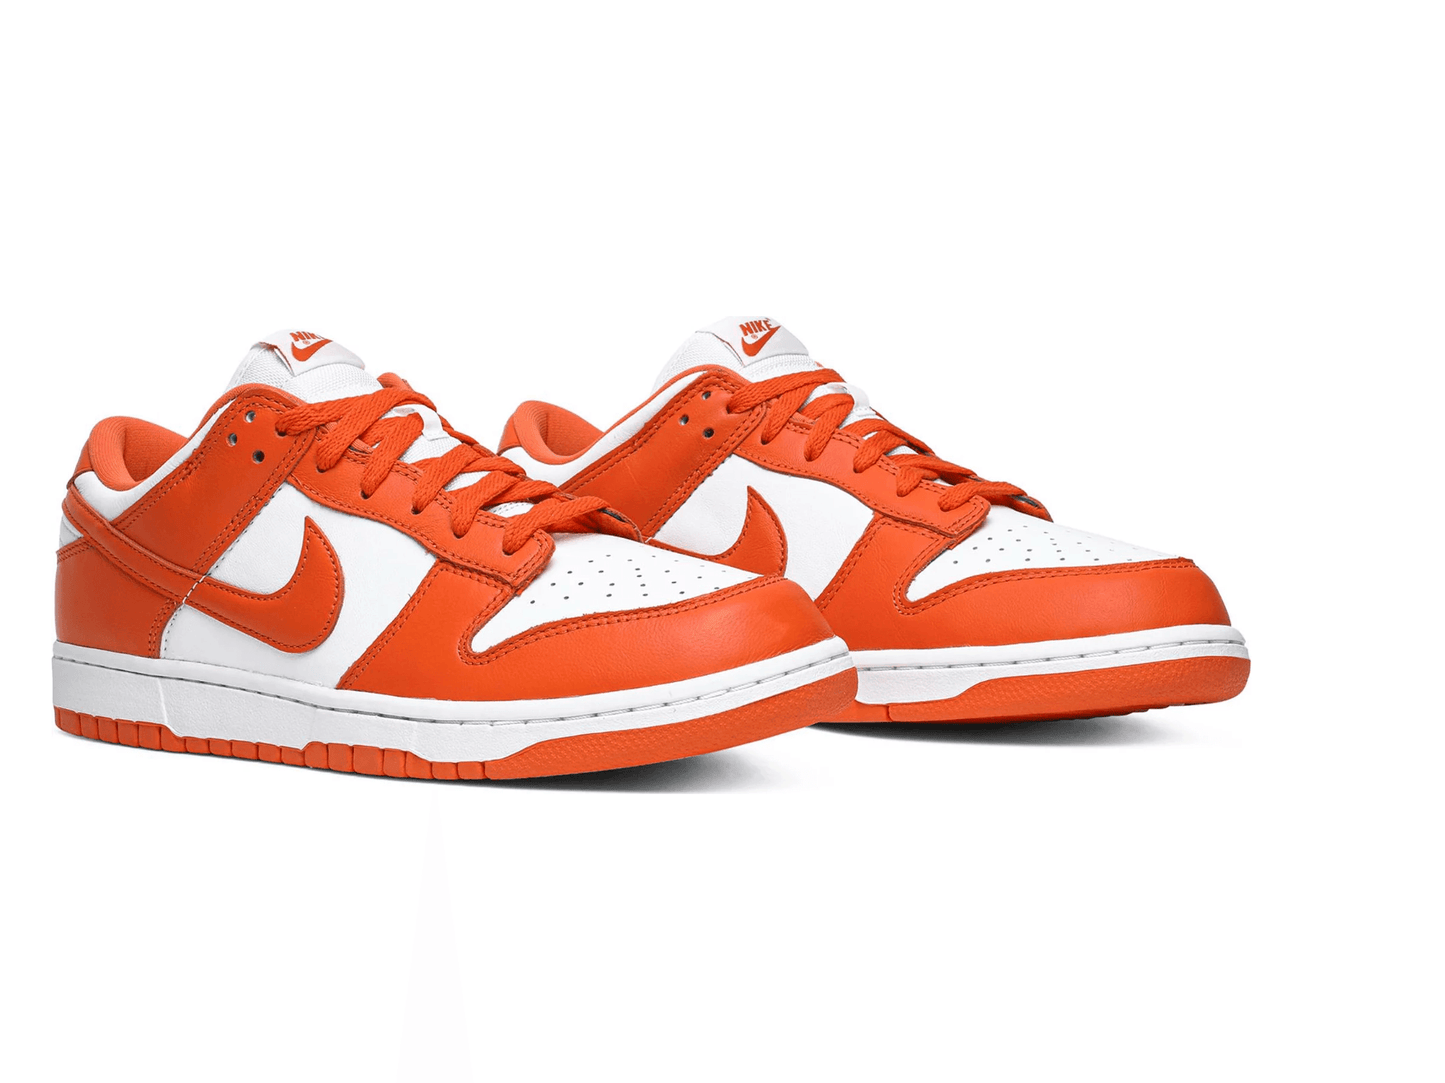 DUNK LOW RETRO SP 'SYRACUSE' - The Flaire